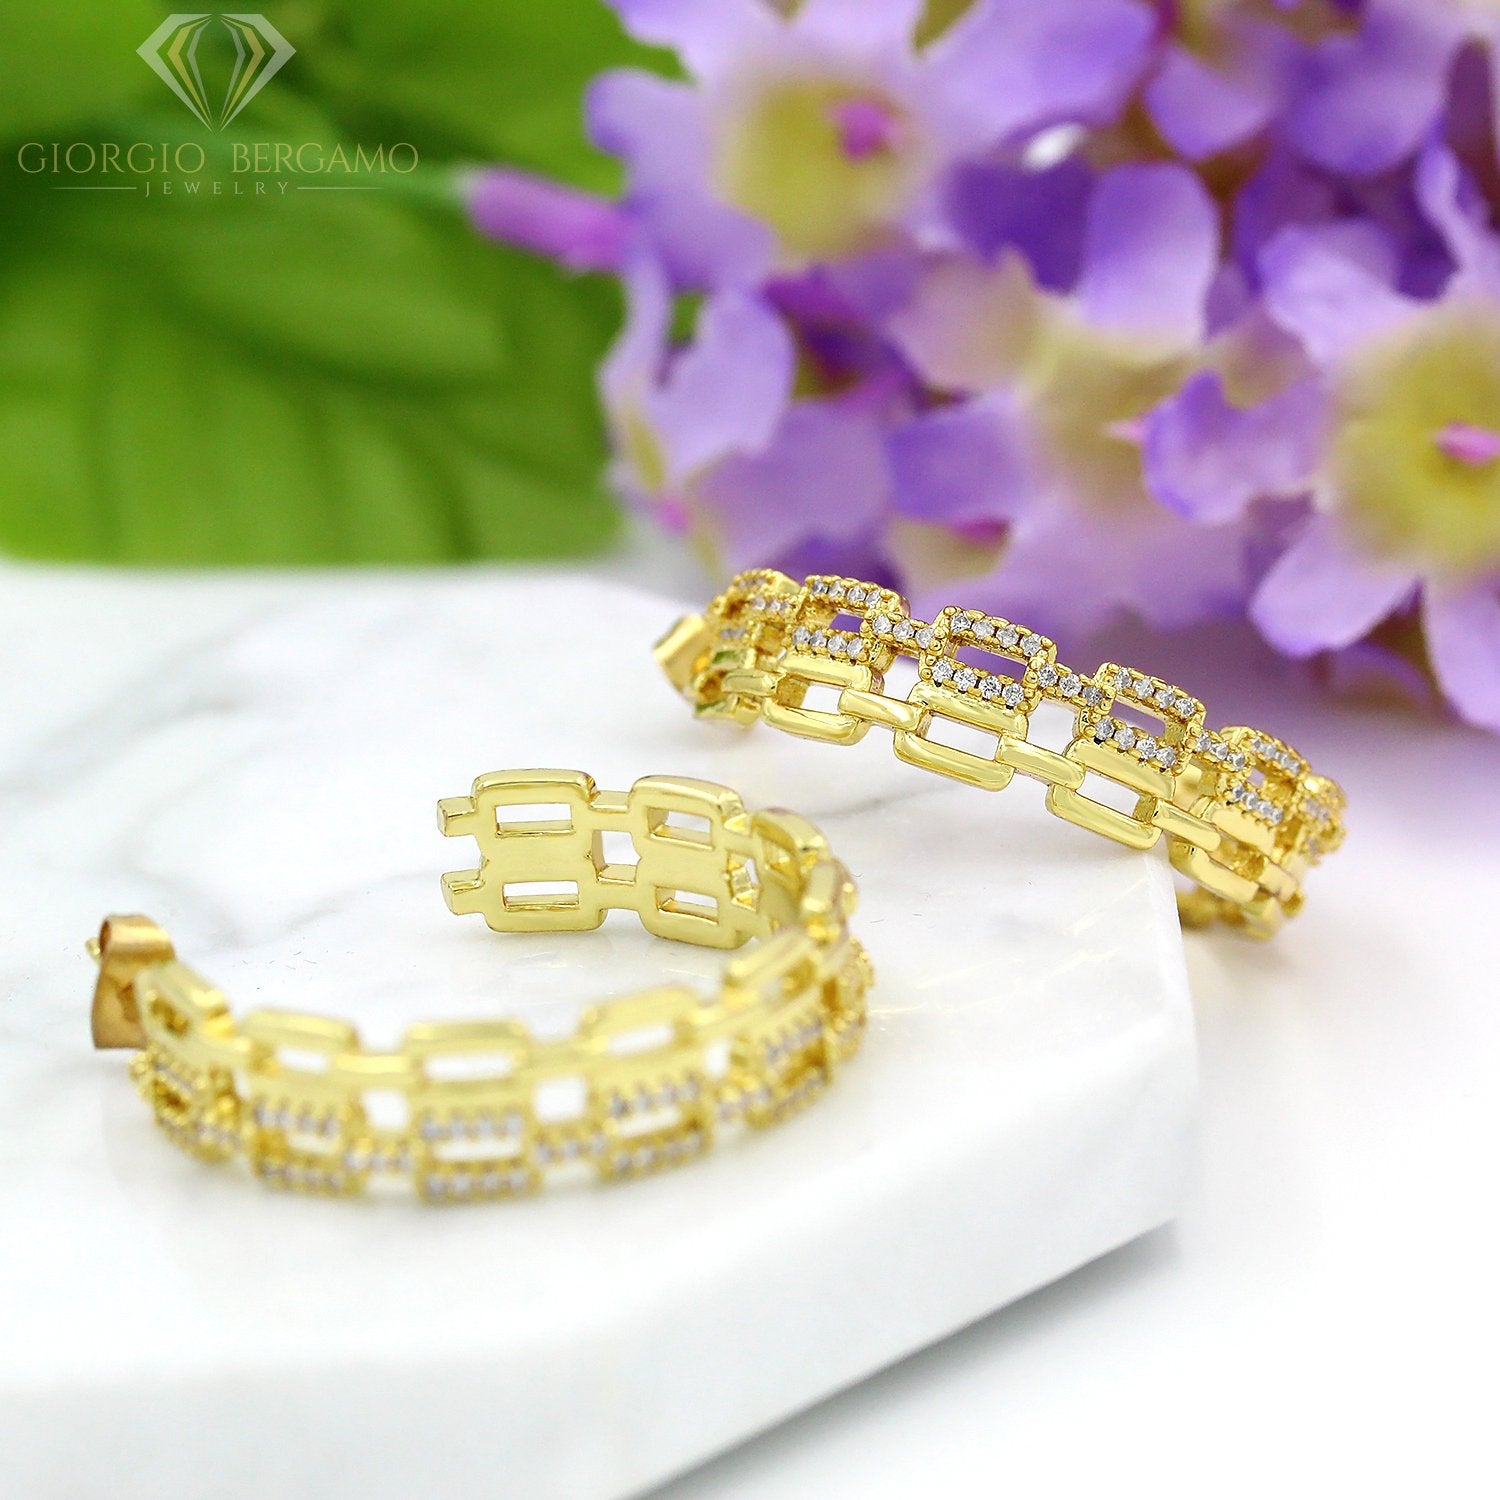 Gold Plated Micro Pave Double Row Paper Clip Hoop Earring